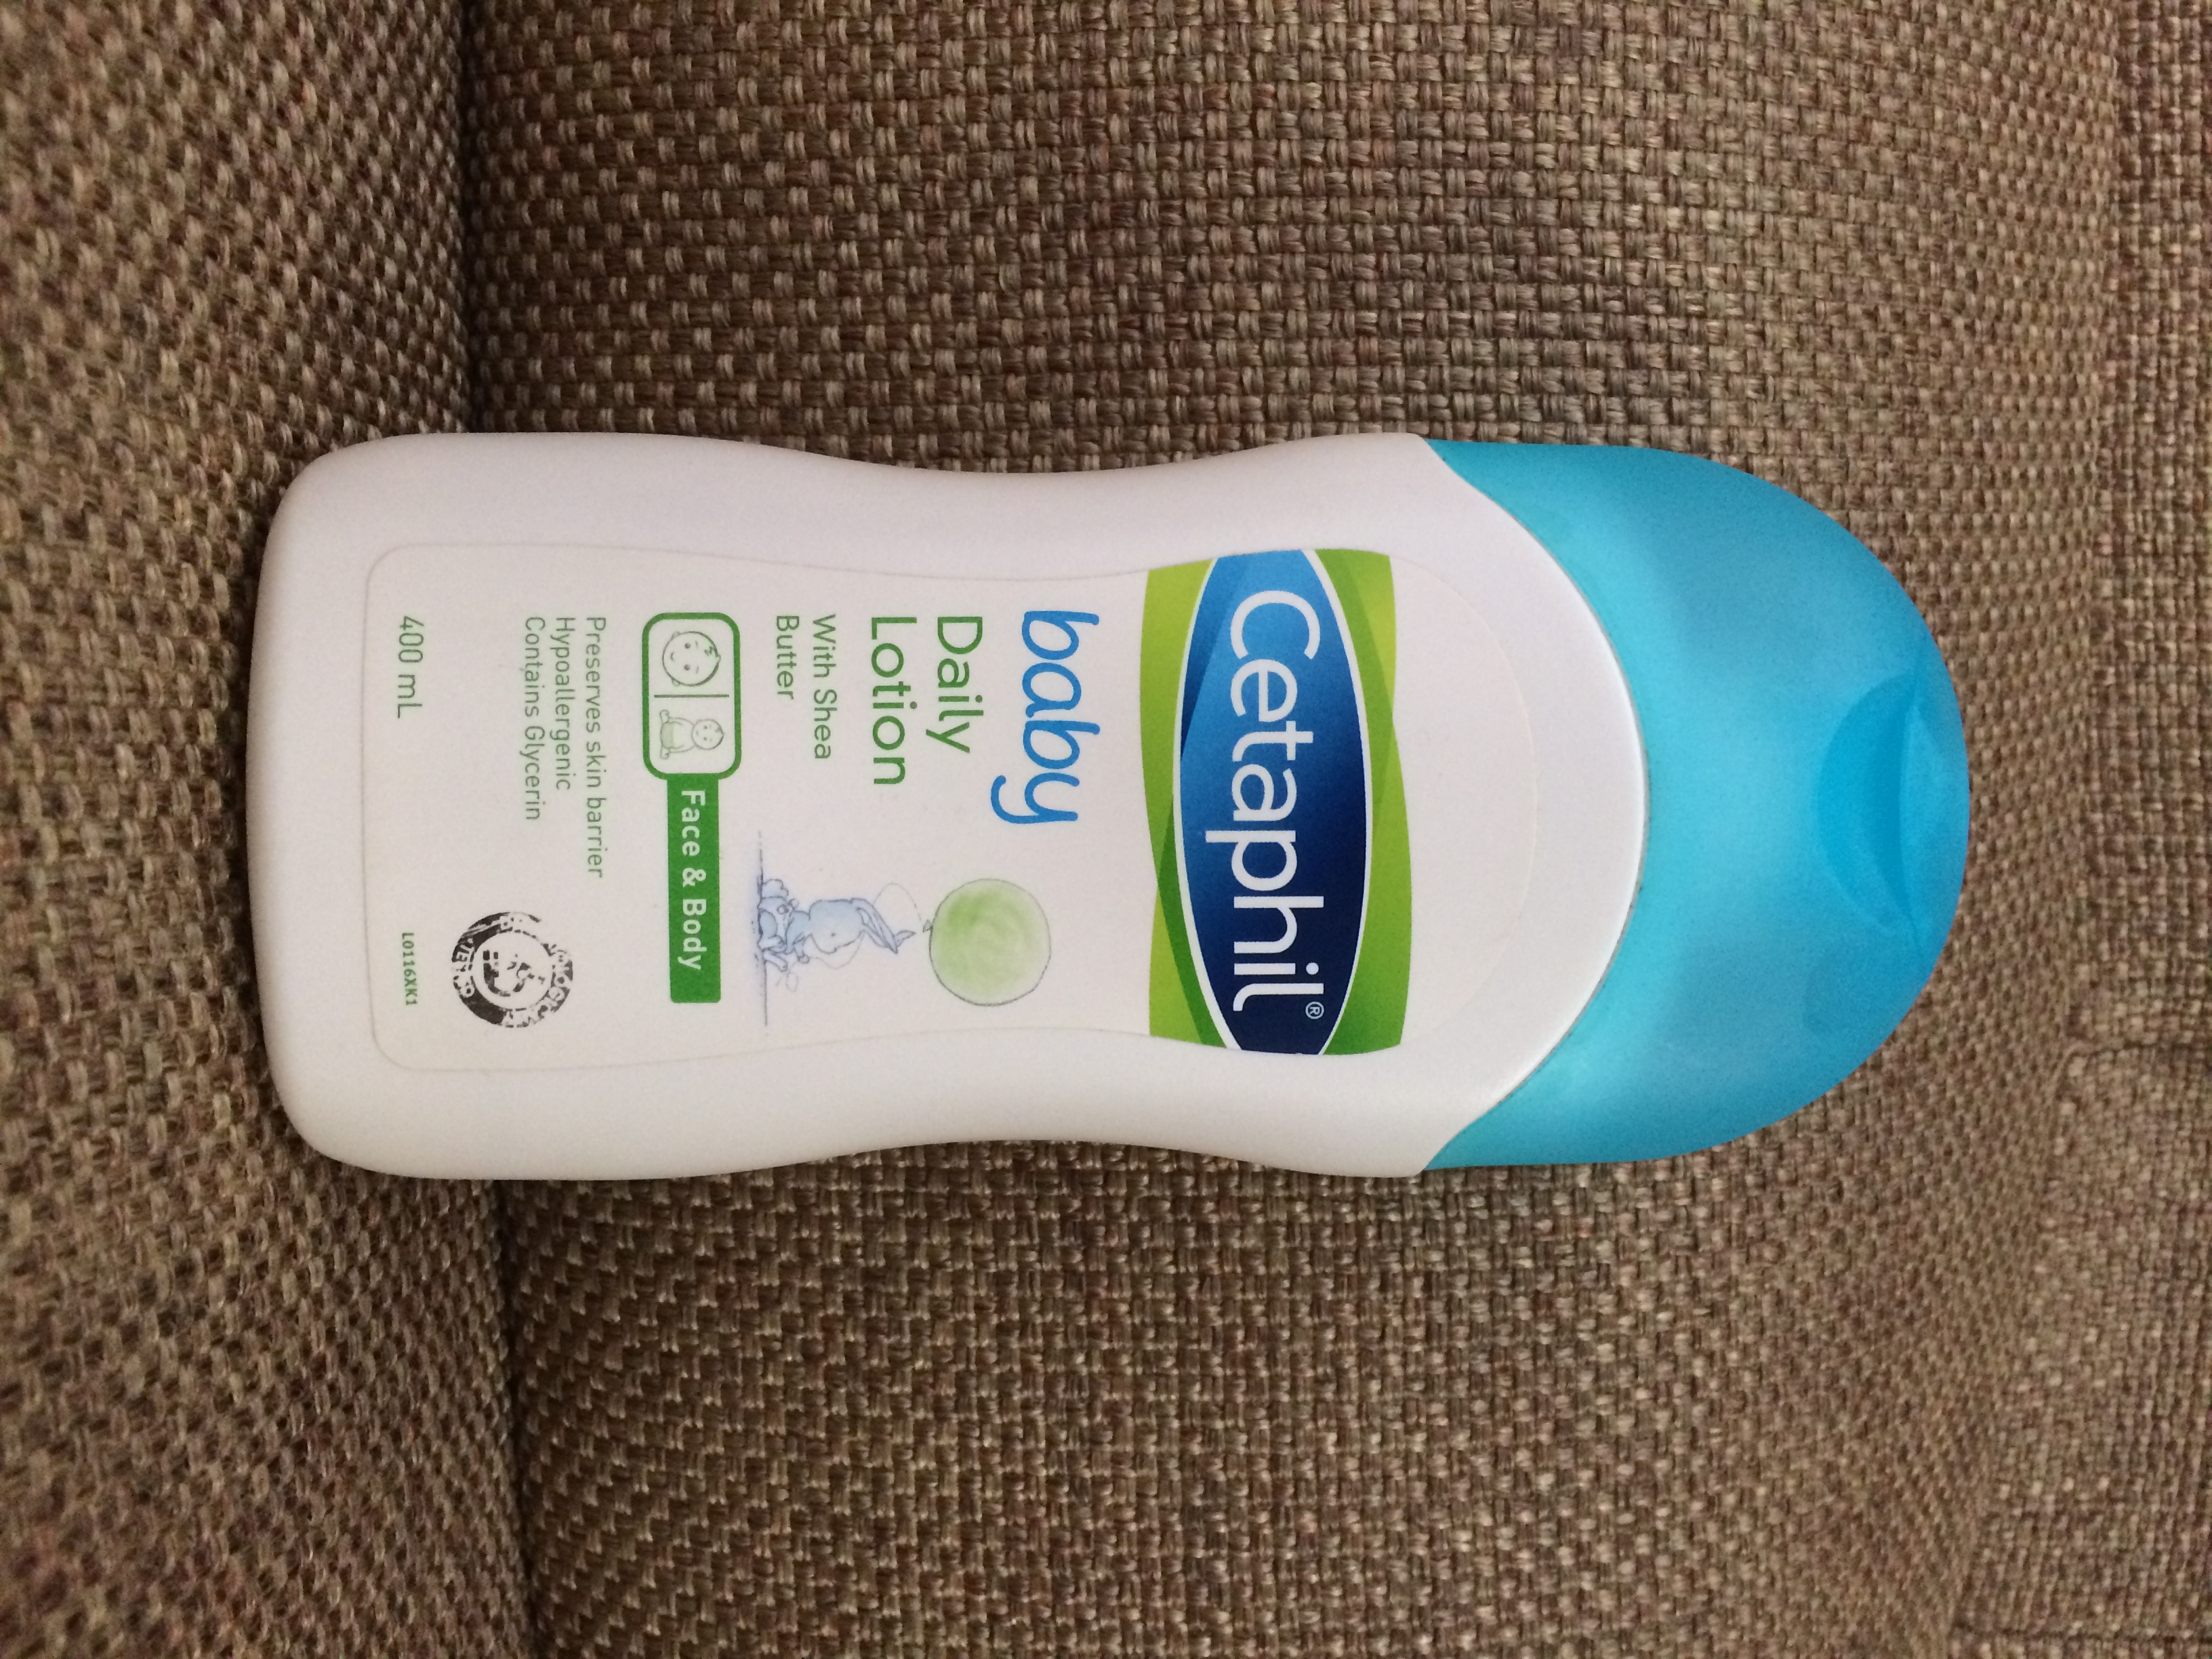 Cetaphil Baby Daily lotion-The safest baby lotion-By deepashree14